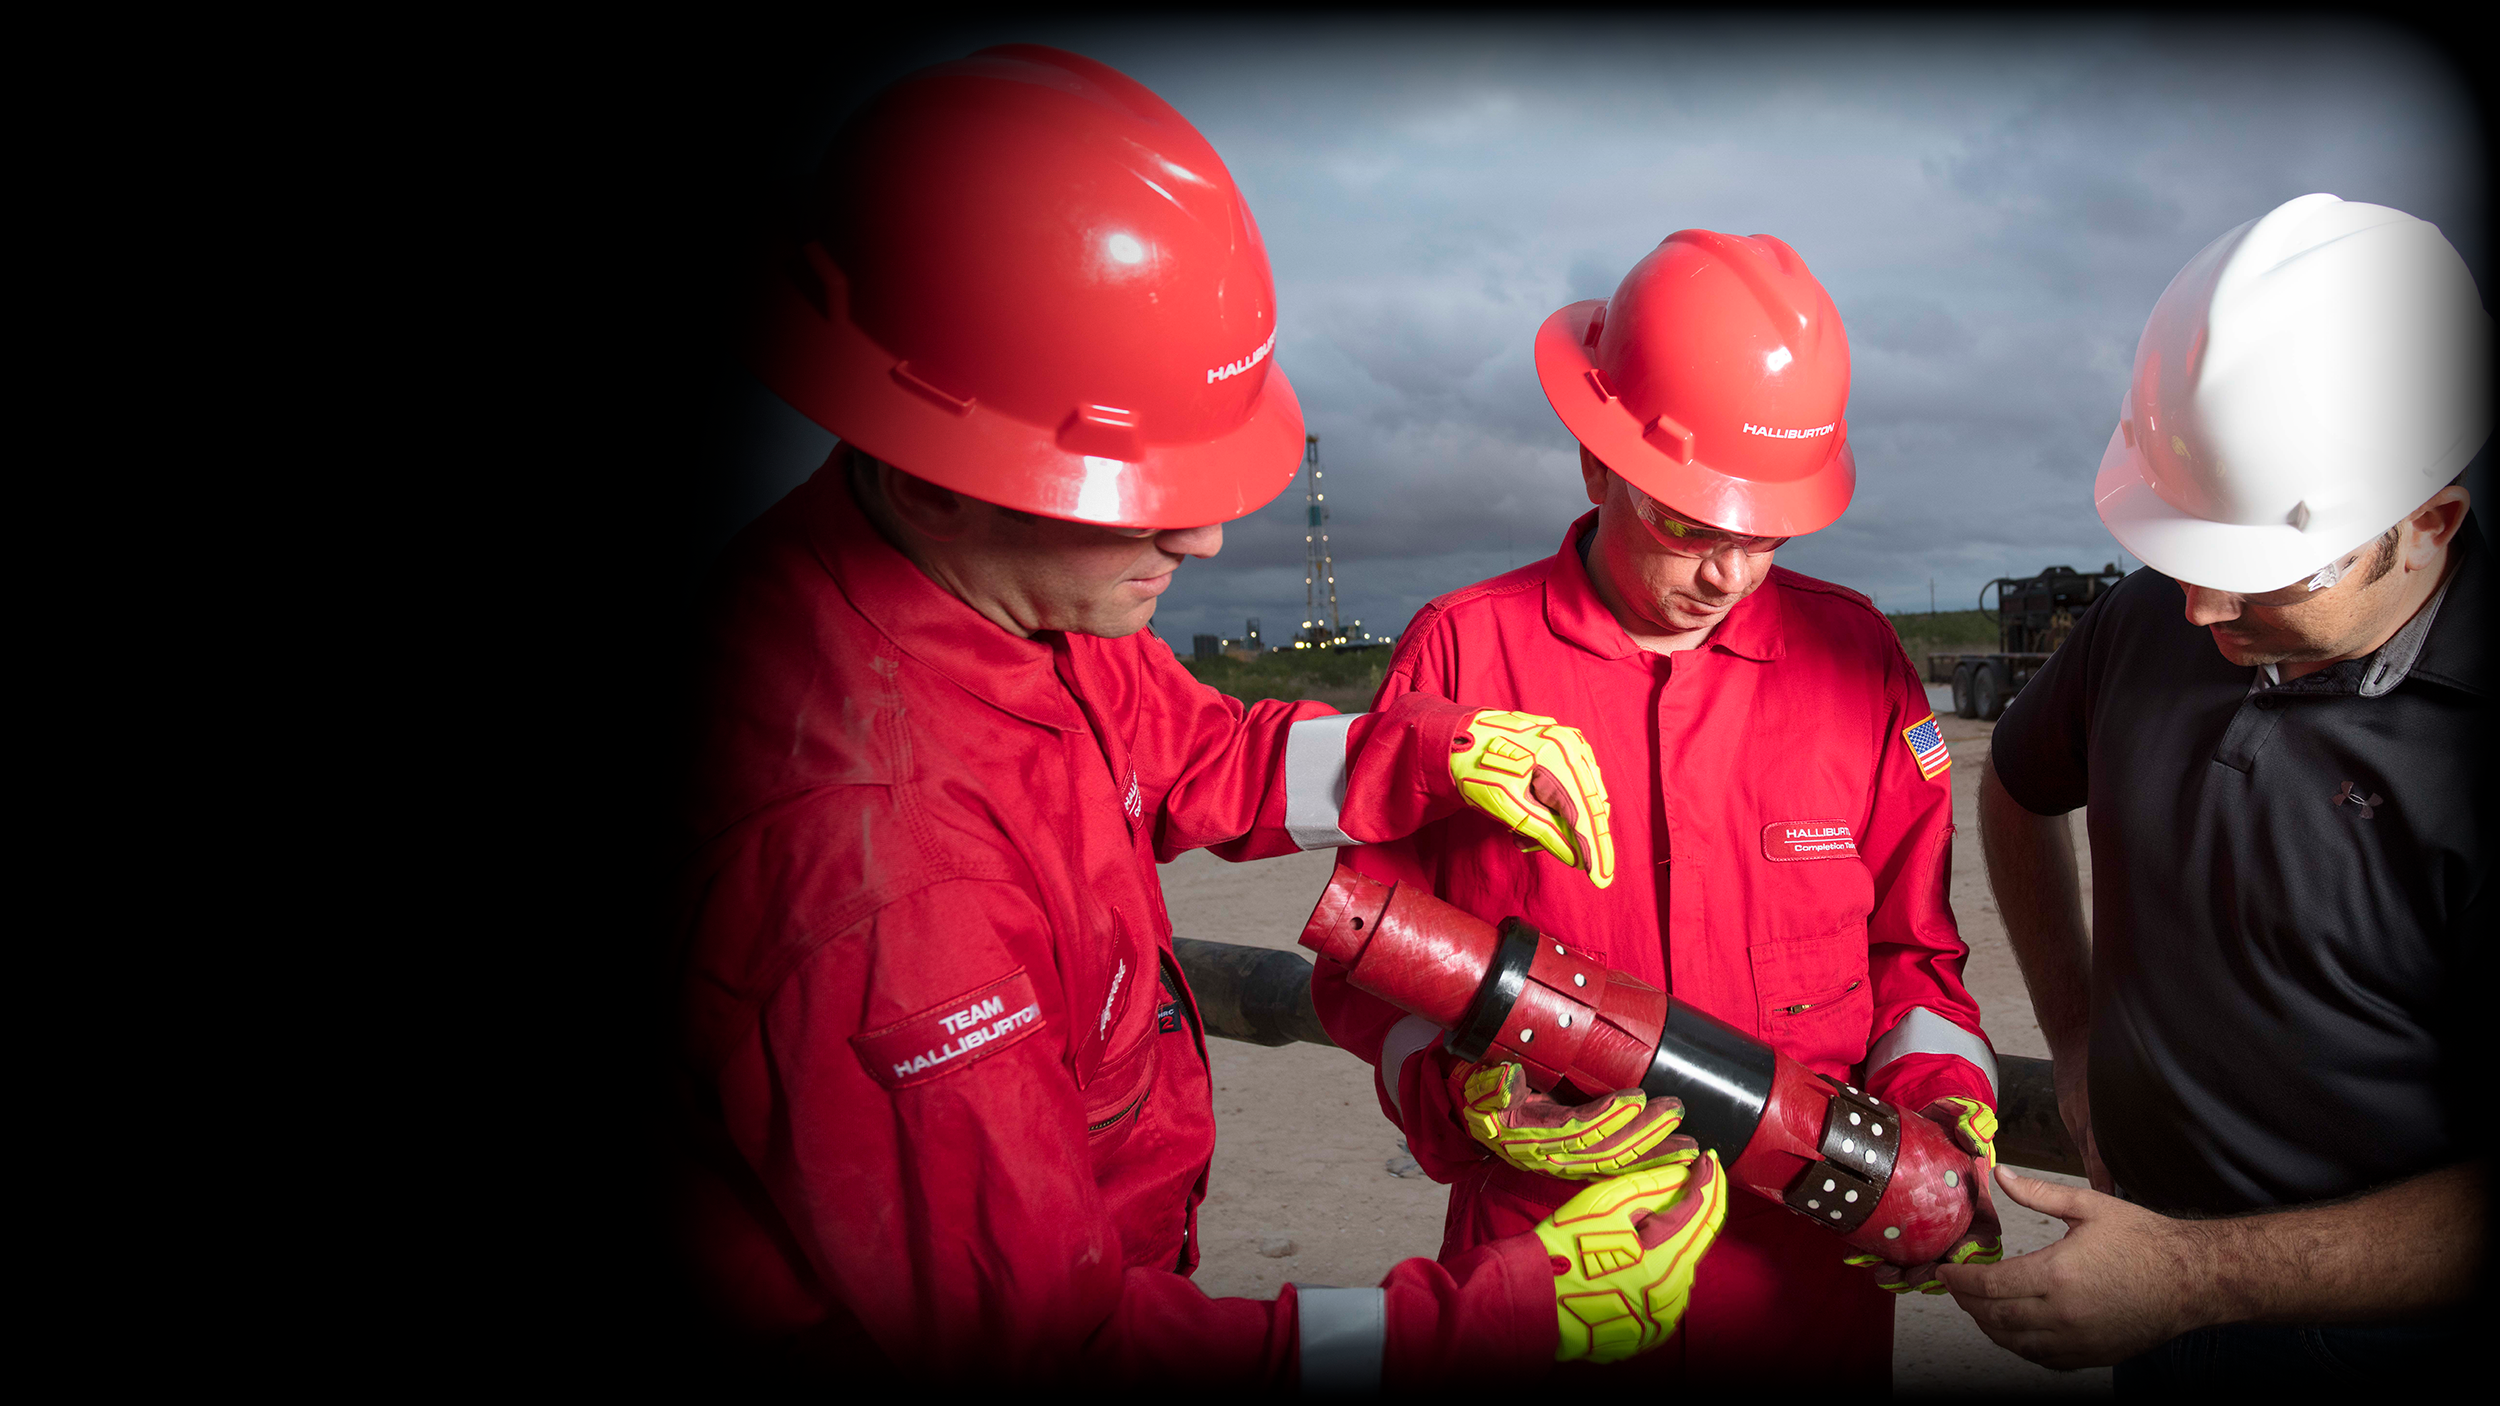 Fas Drill® Ultra frac plugs reduce time and difficulty of millout